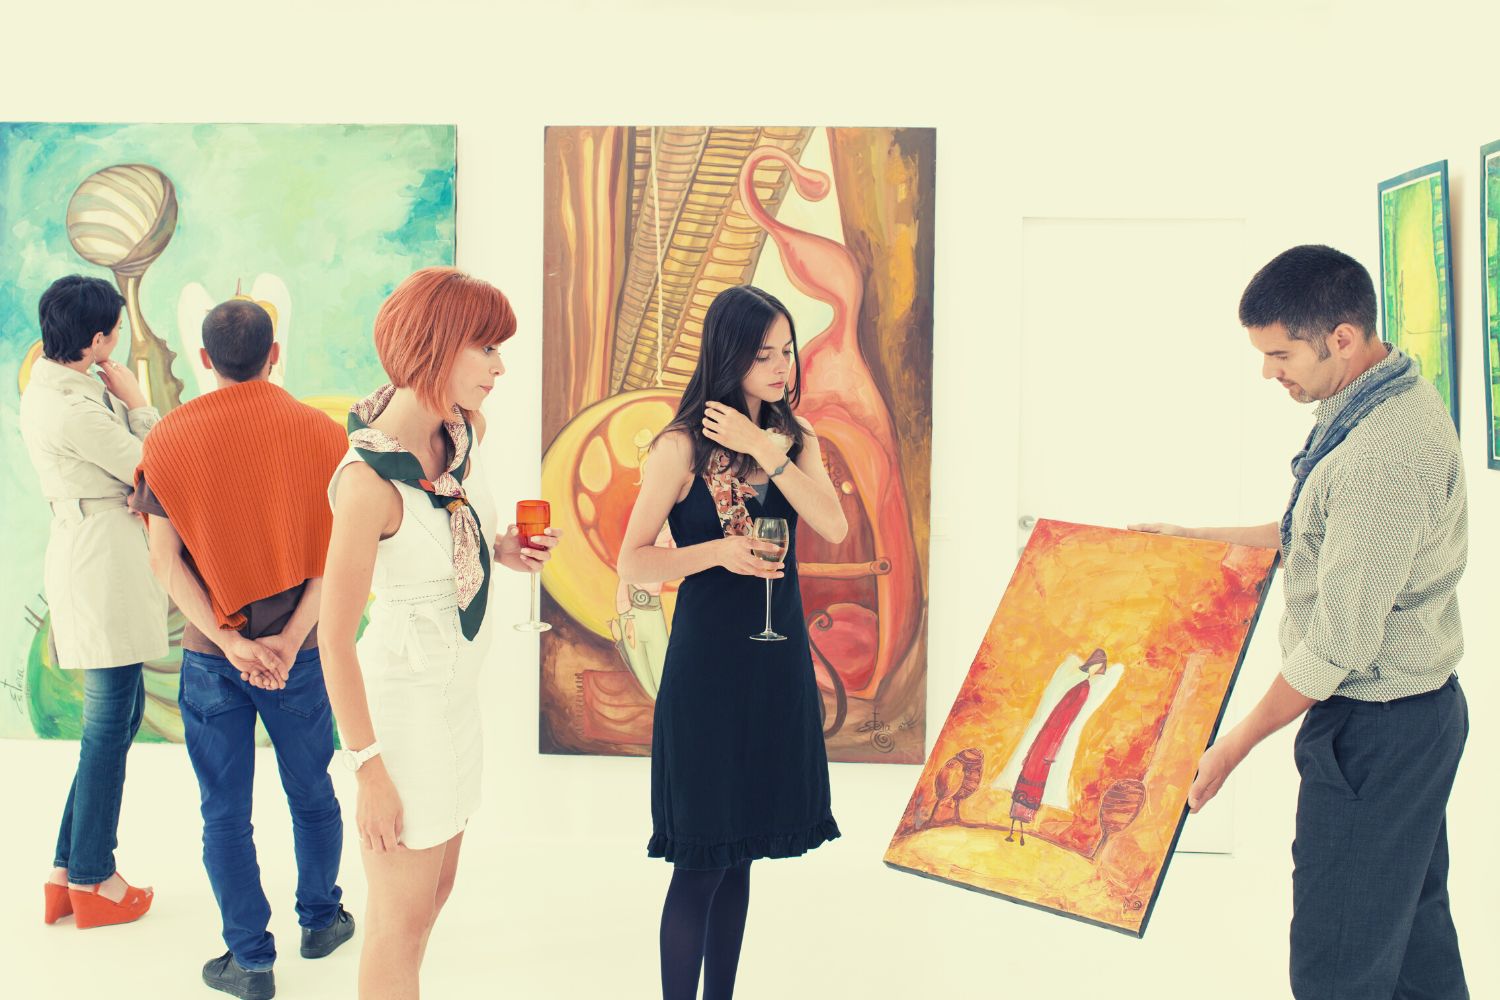 Two ladies are checking a painting and a man is explaining a painting in an art gallery